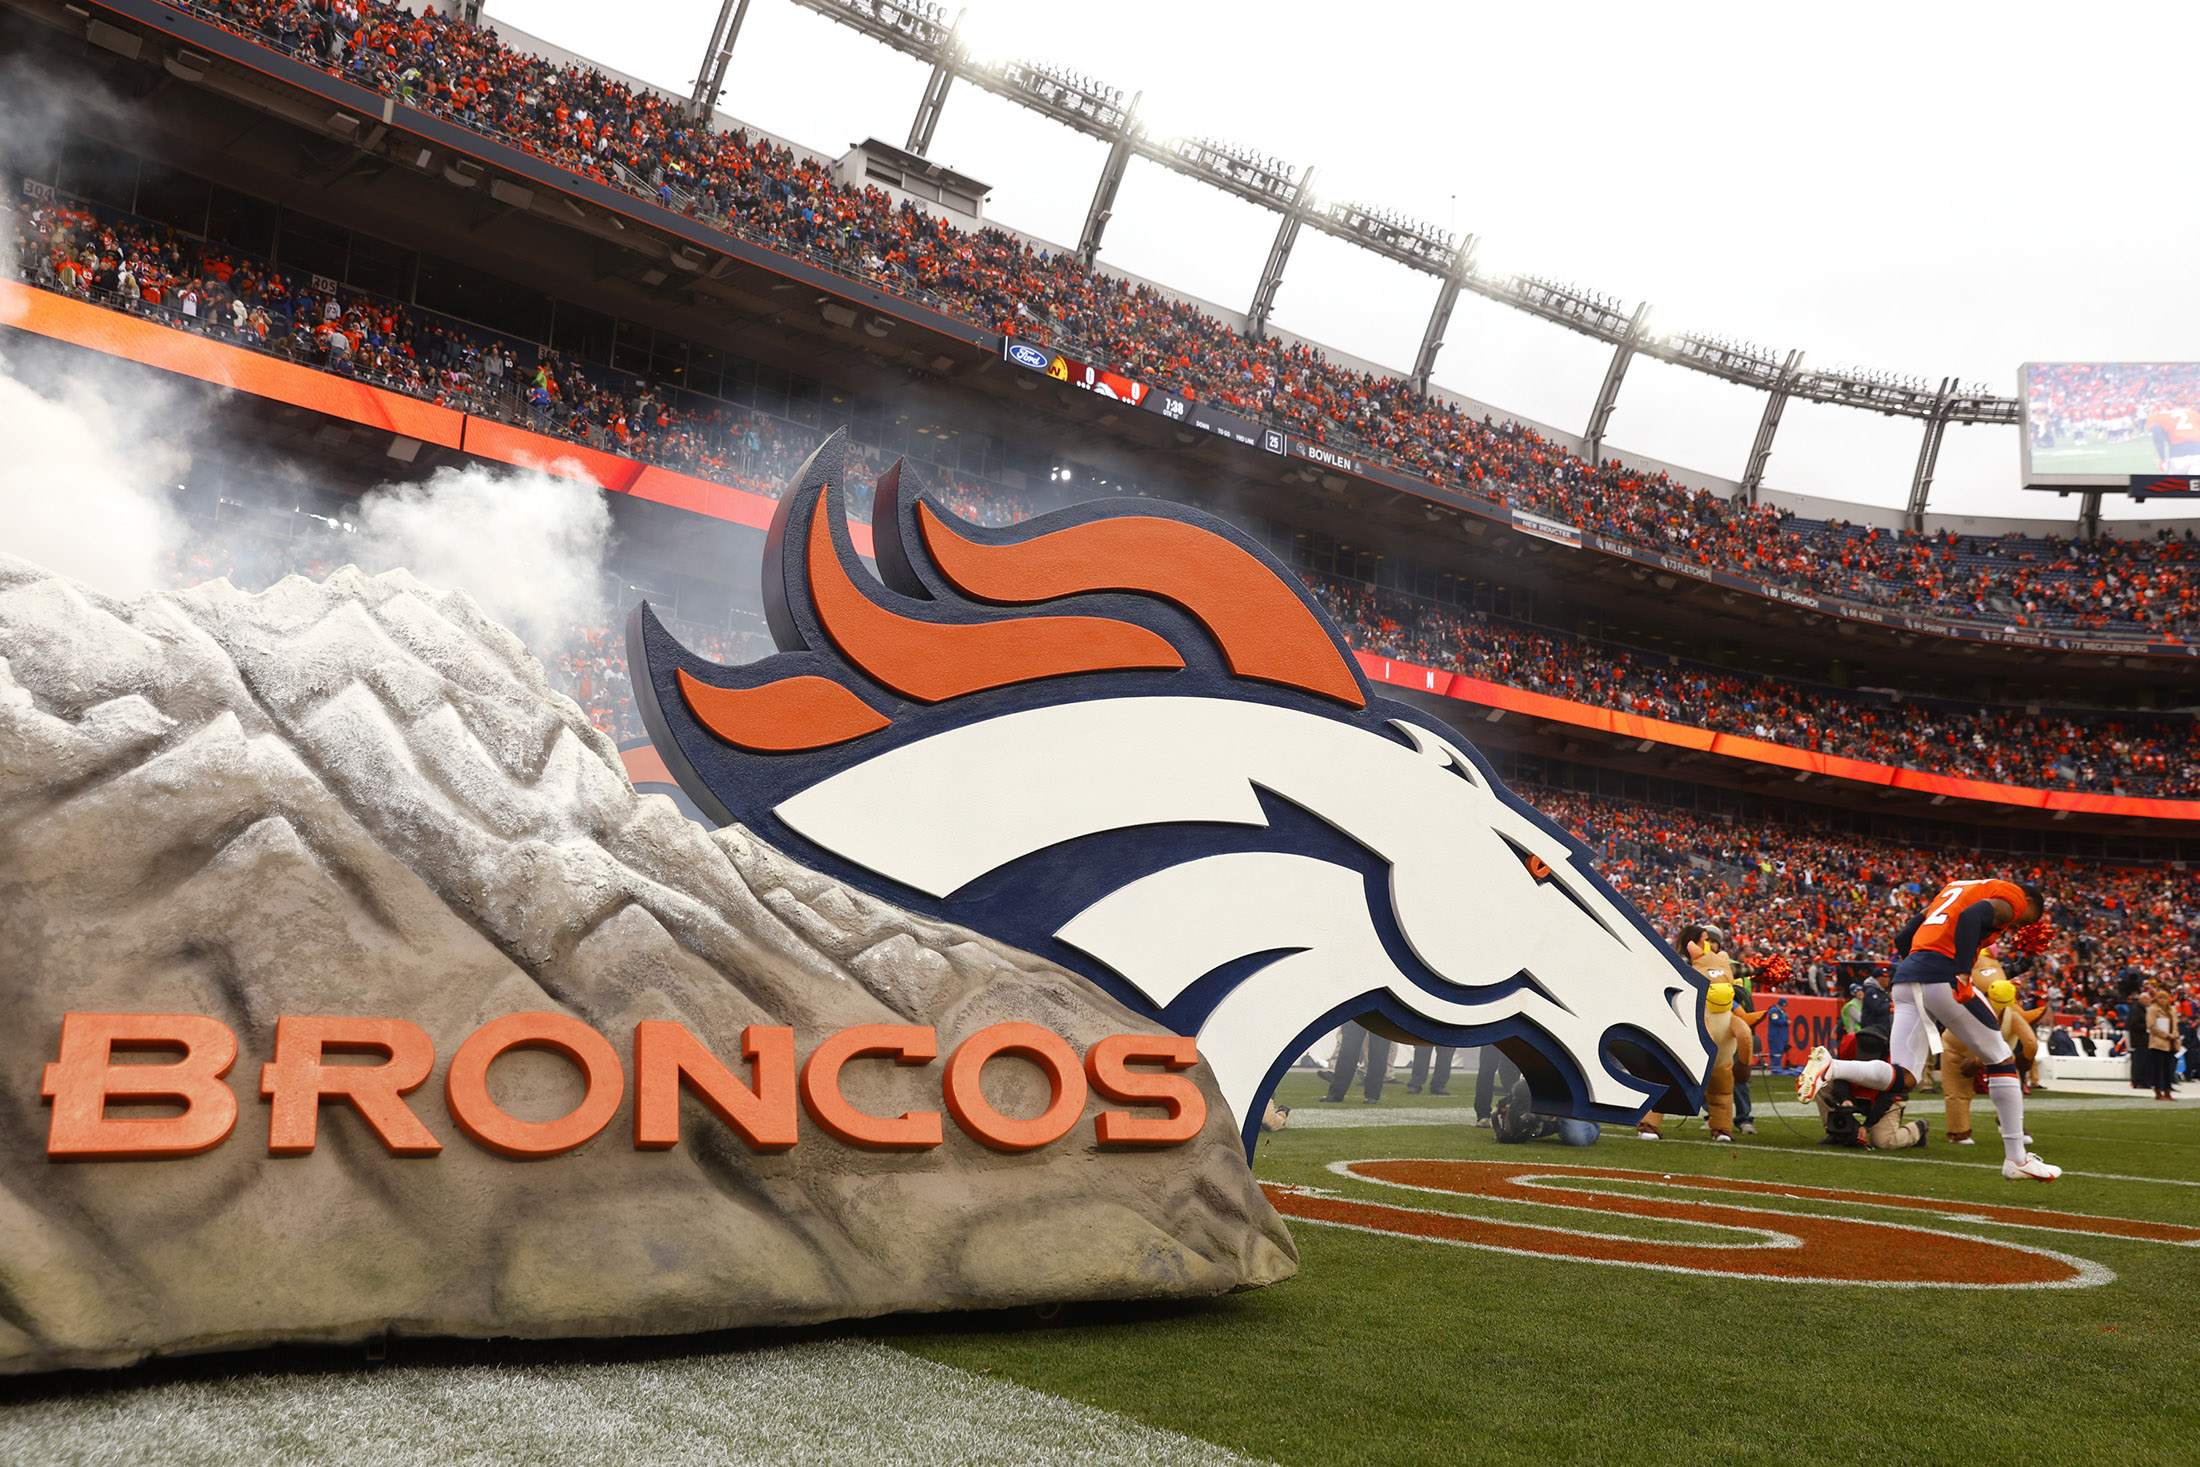 Denver Broncos Spoke to Banks About Possible Sale, Sportico Says